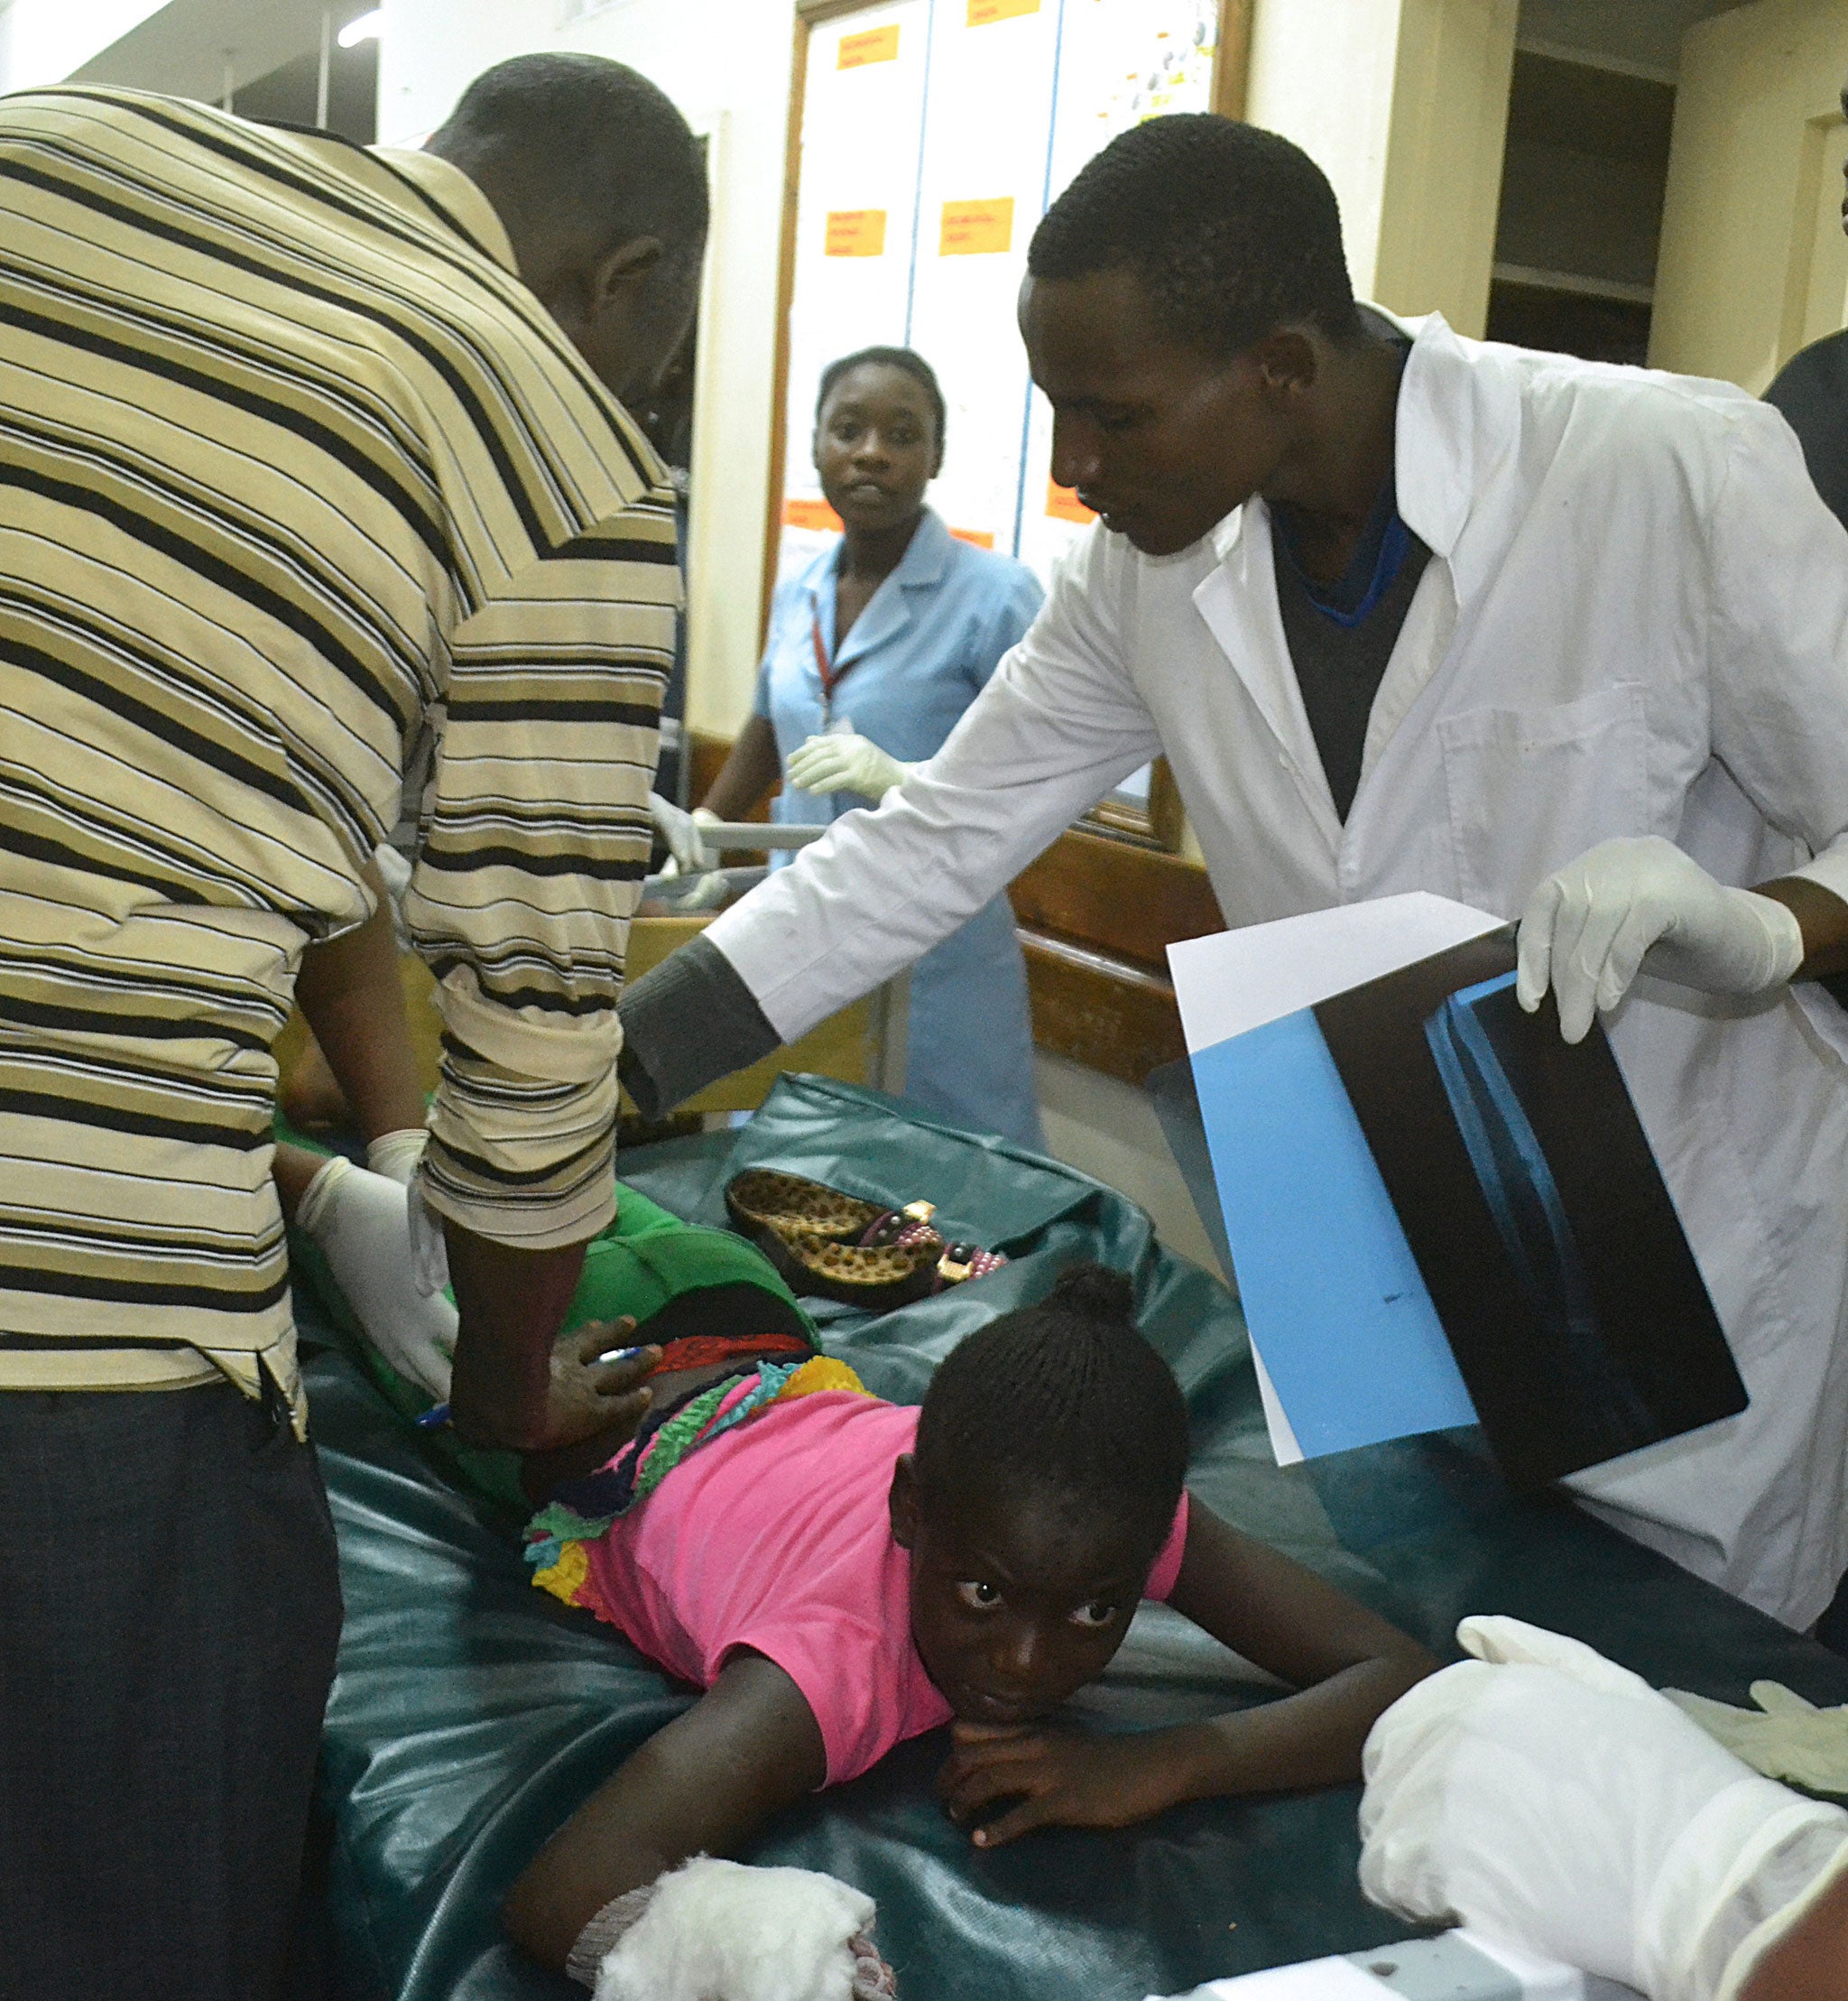 An injured girl receives medical treatment at the Coast general hospital in Mombasa, after sustaining injuries following an explosion in the busy Mwembe Tayari area of the city centre